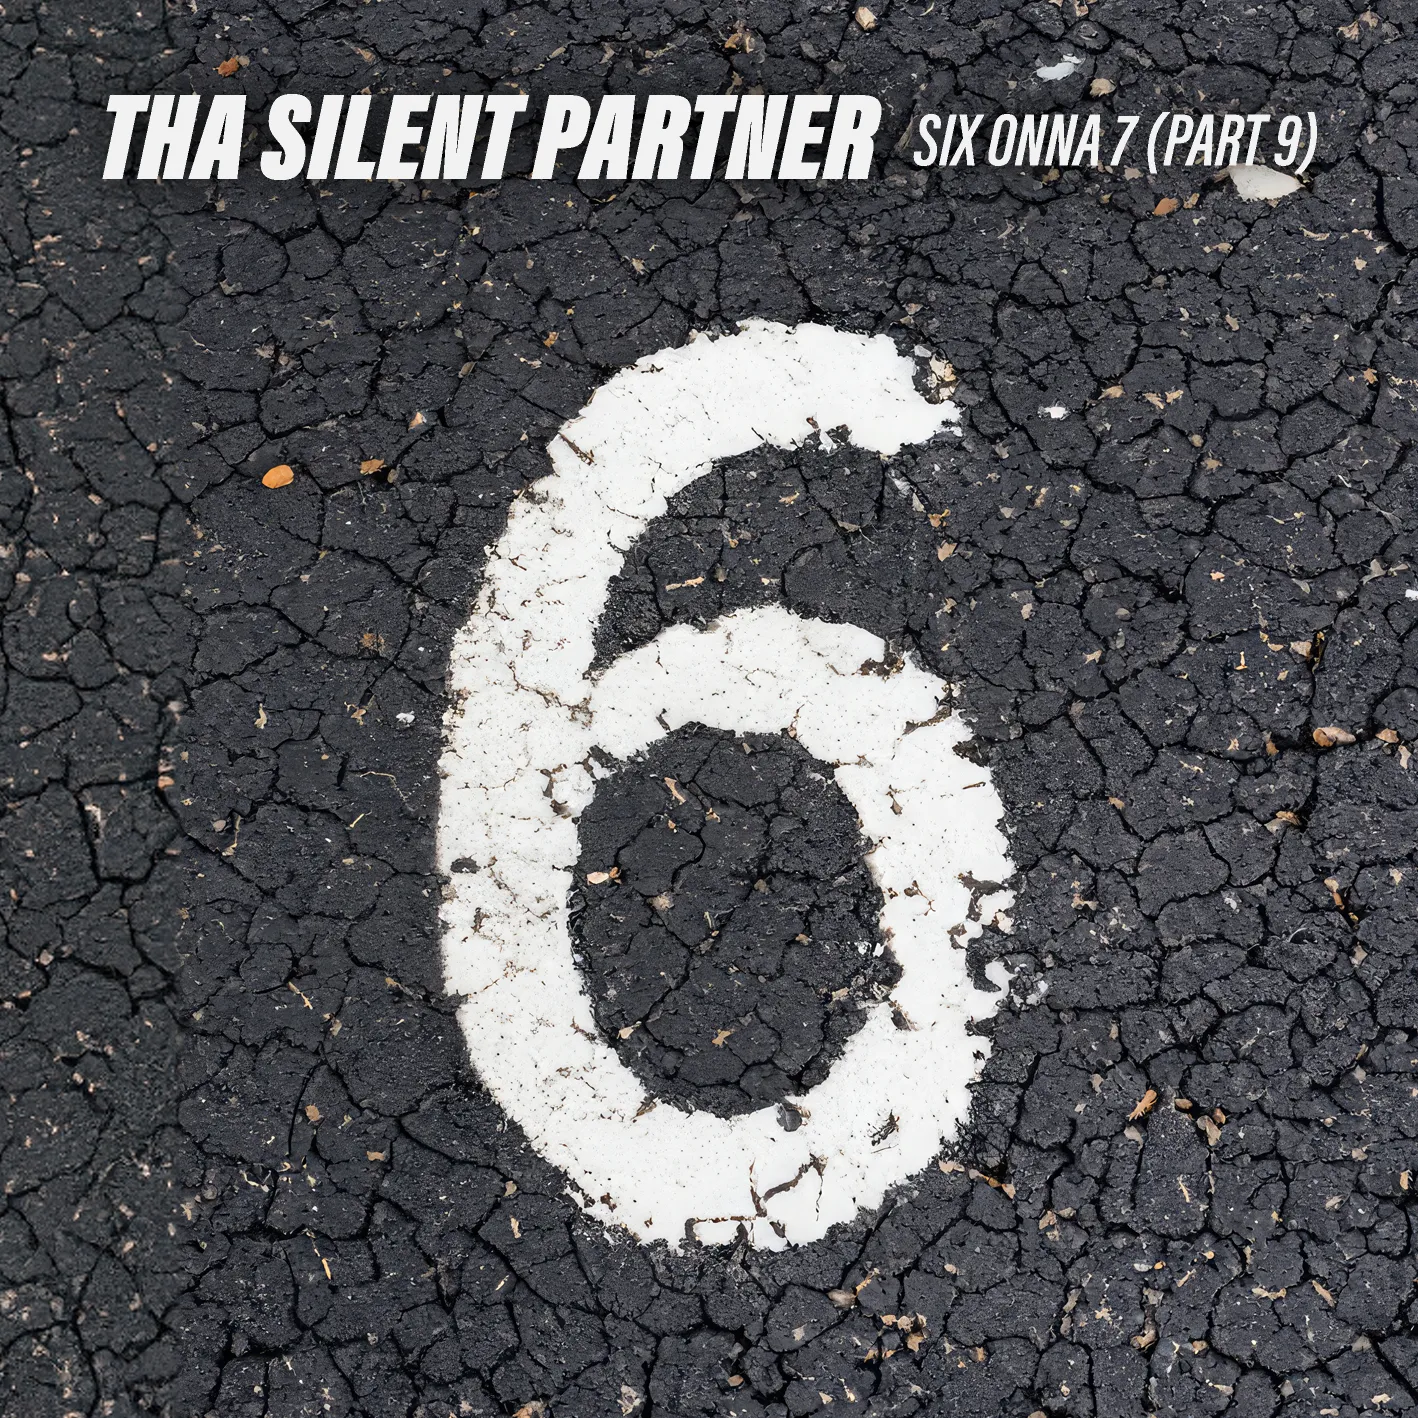 Cover art for “SIX ONNA 7 (Part 9)” by Tha Silent Partner